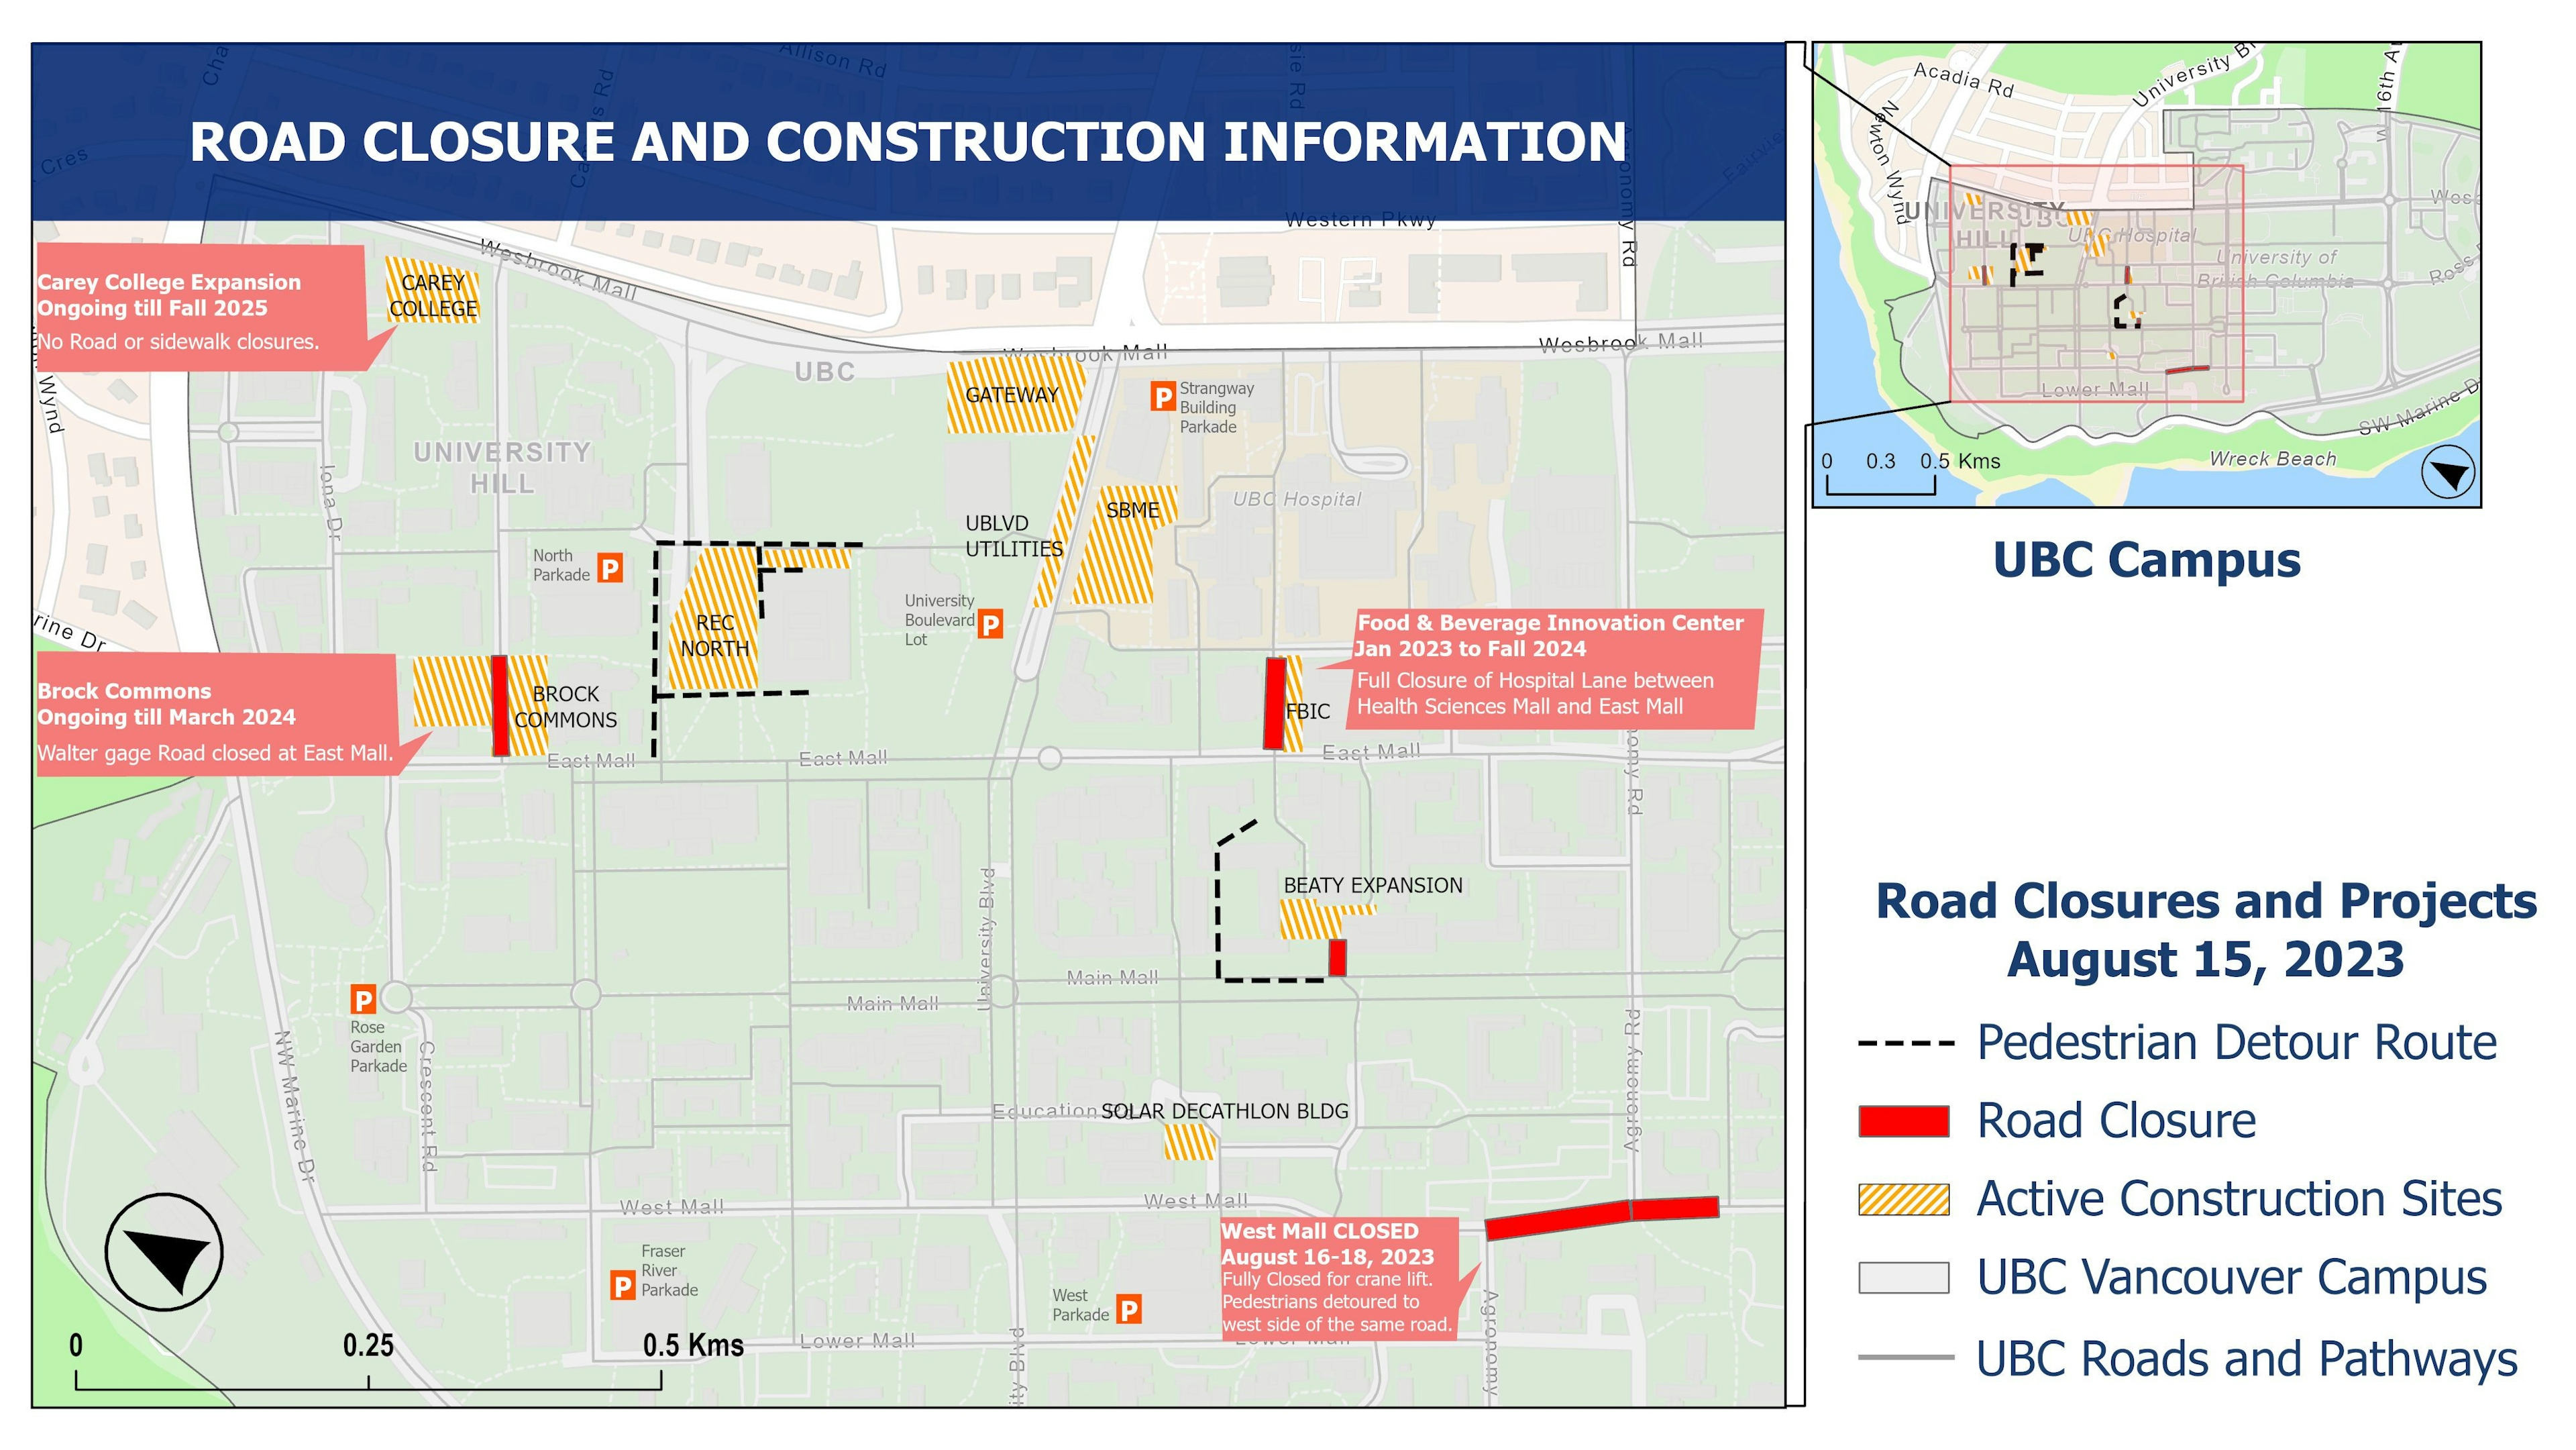 UBC Road Closure and Construction Map